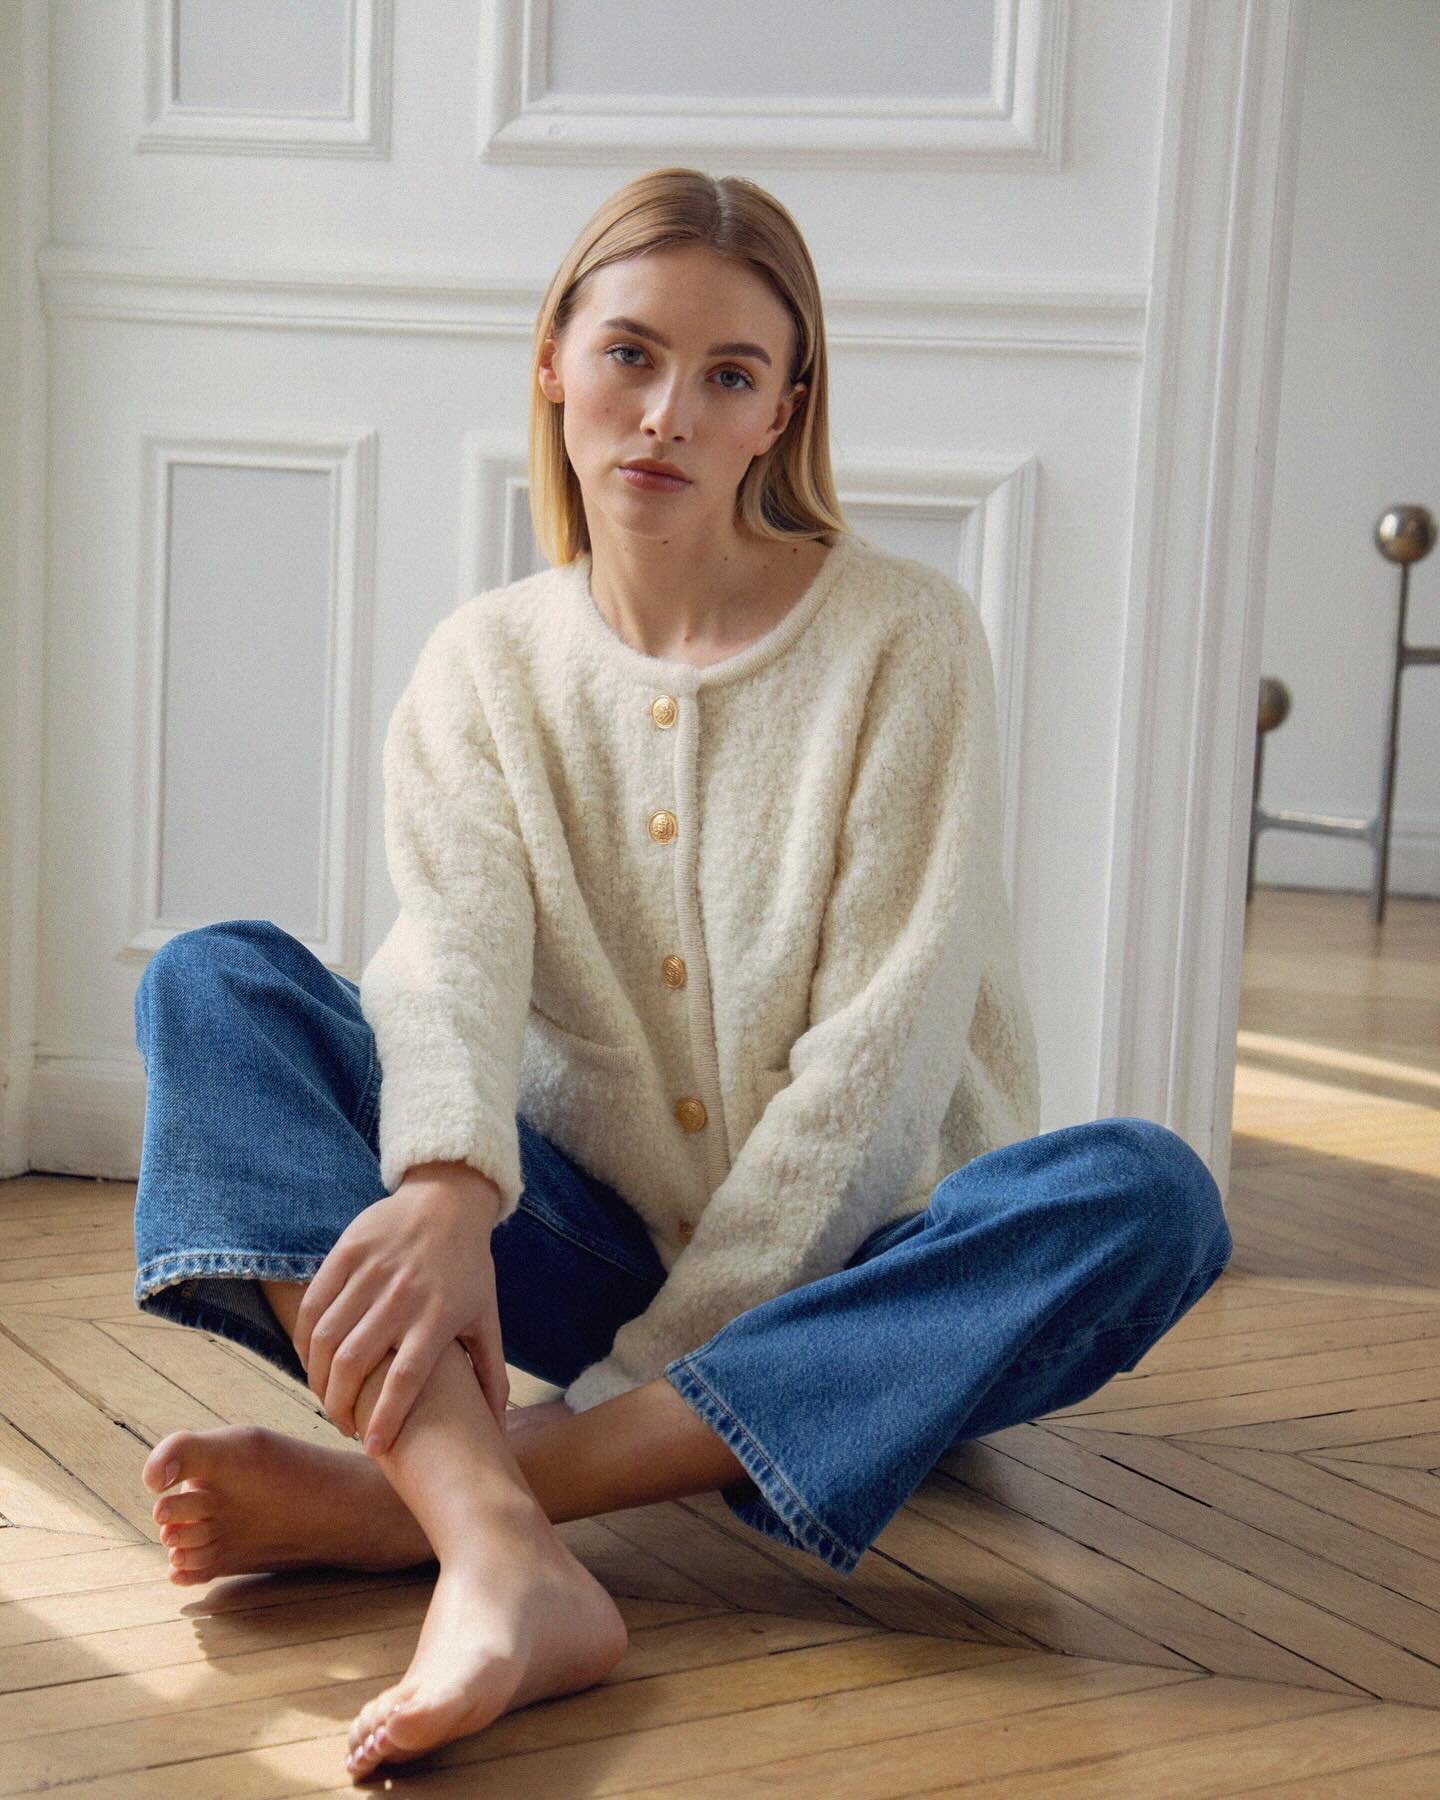 LE RODOLPHE
Brushed Alpaga

We are beyond excited to launch a new knit piece designed to renew our cardigan family! Knitted from a soft brushed boucl&eacute; extrafine alpaca blend for the most desirable textured finish and embellished with our signa